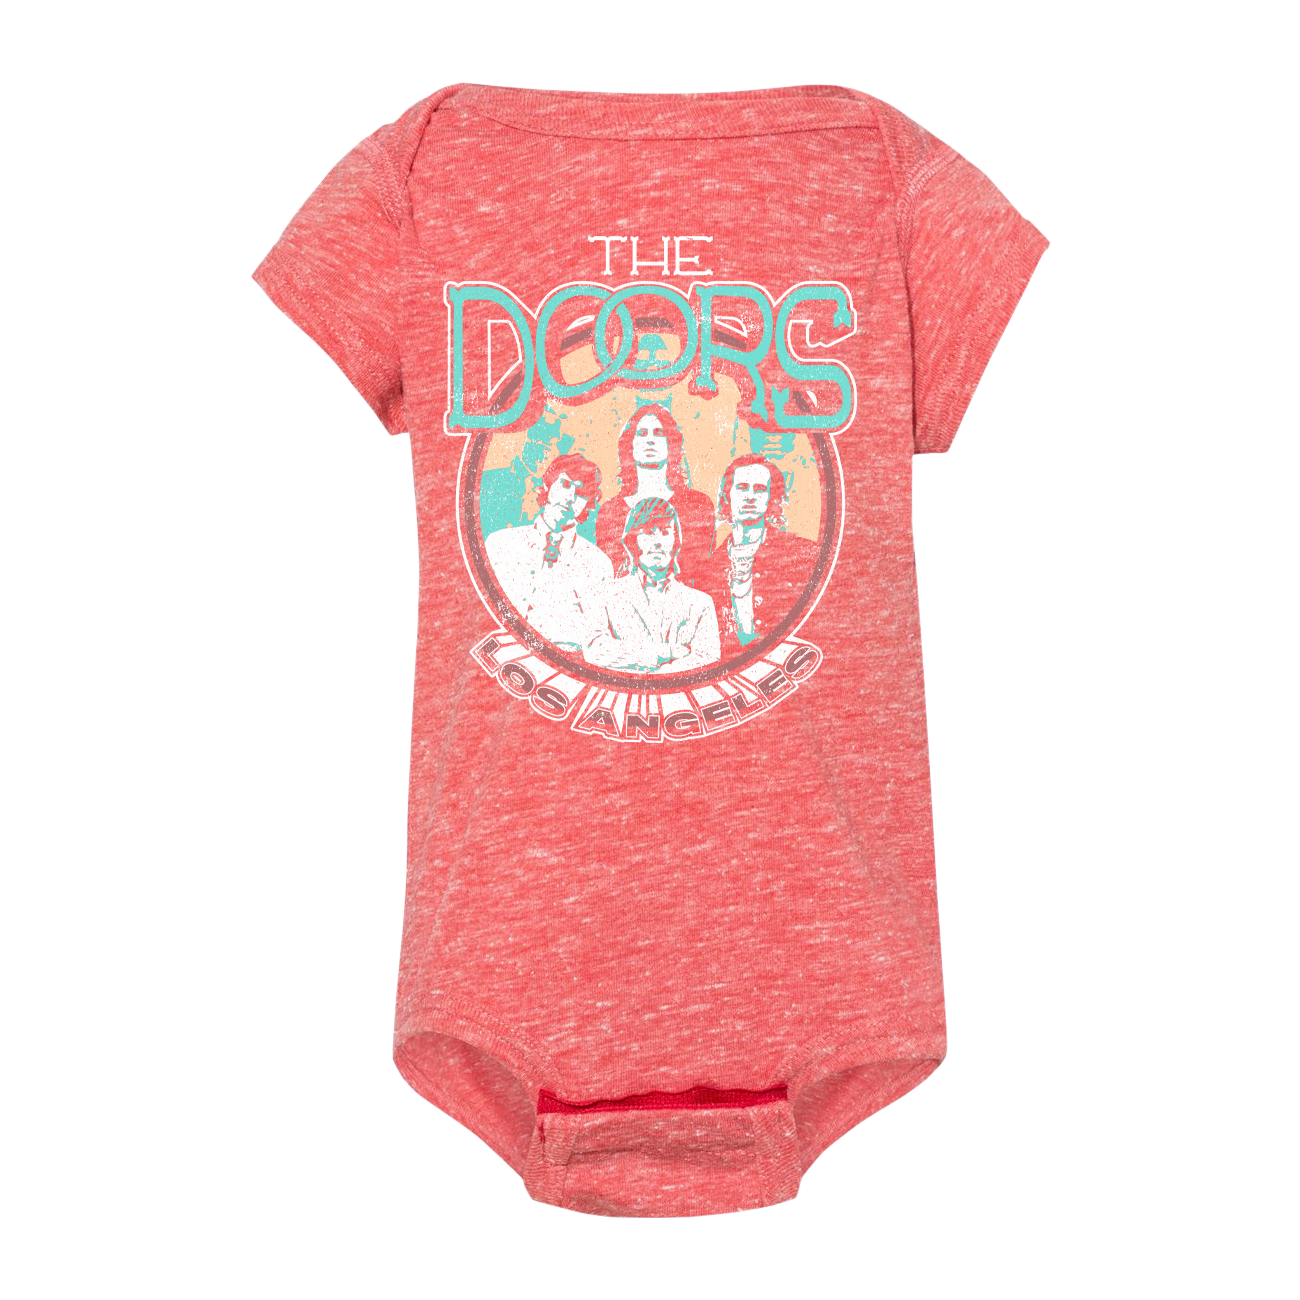 Los Angeles Infant One Piece The Doors Official Online Store